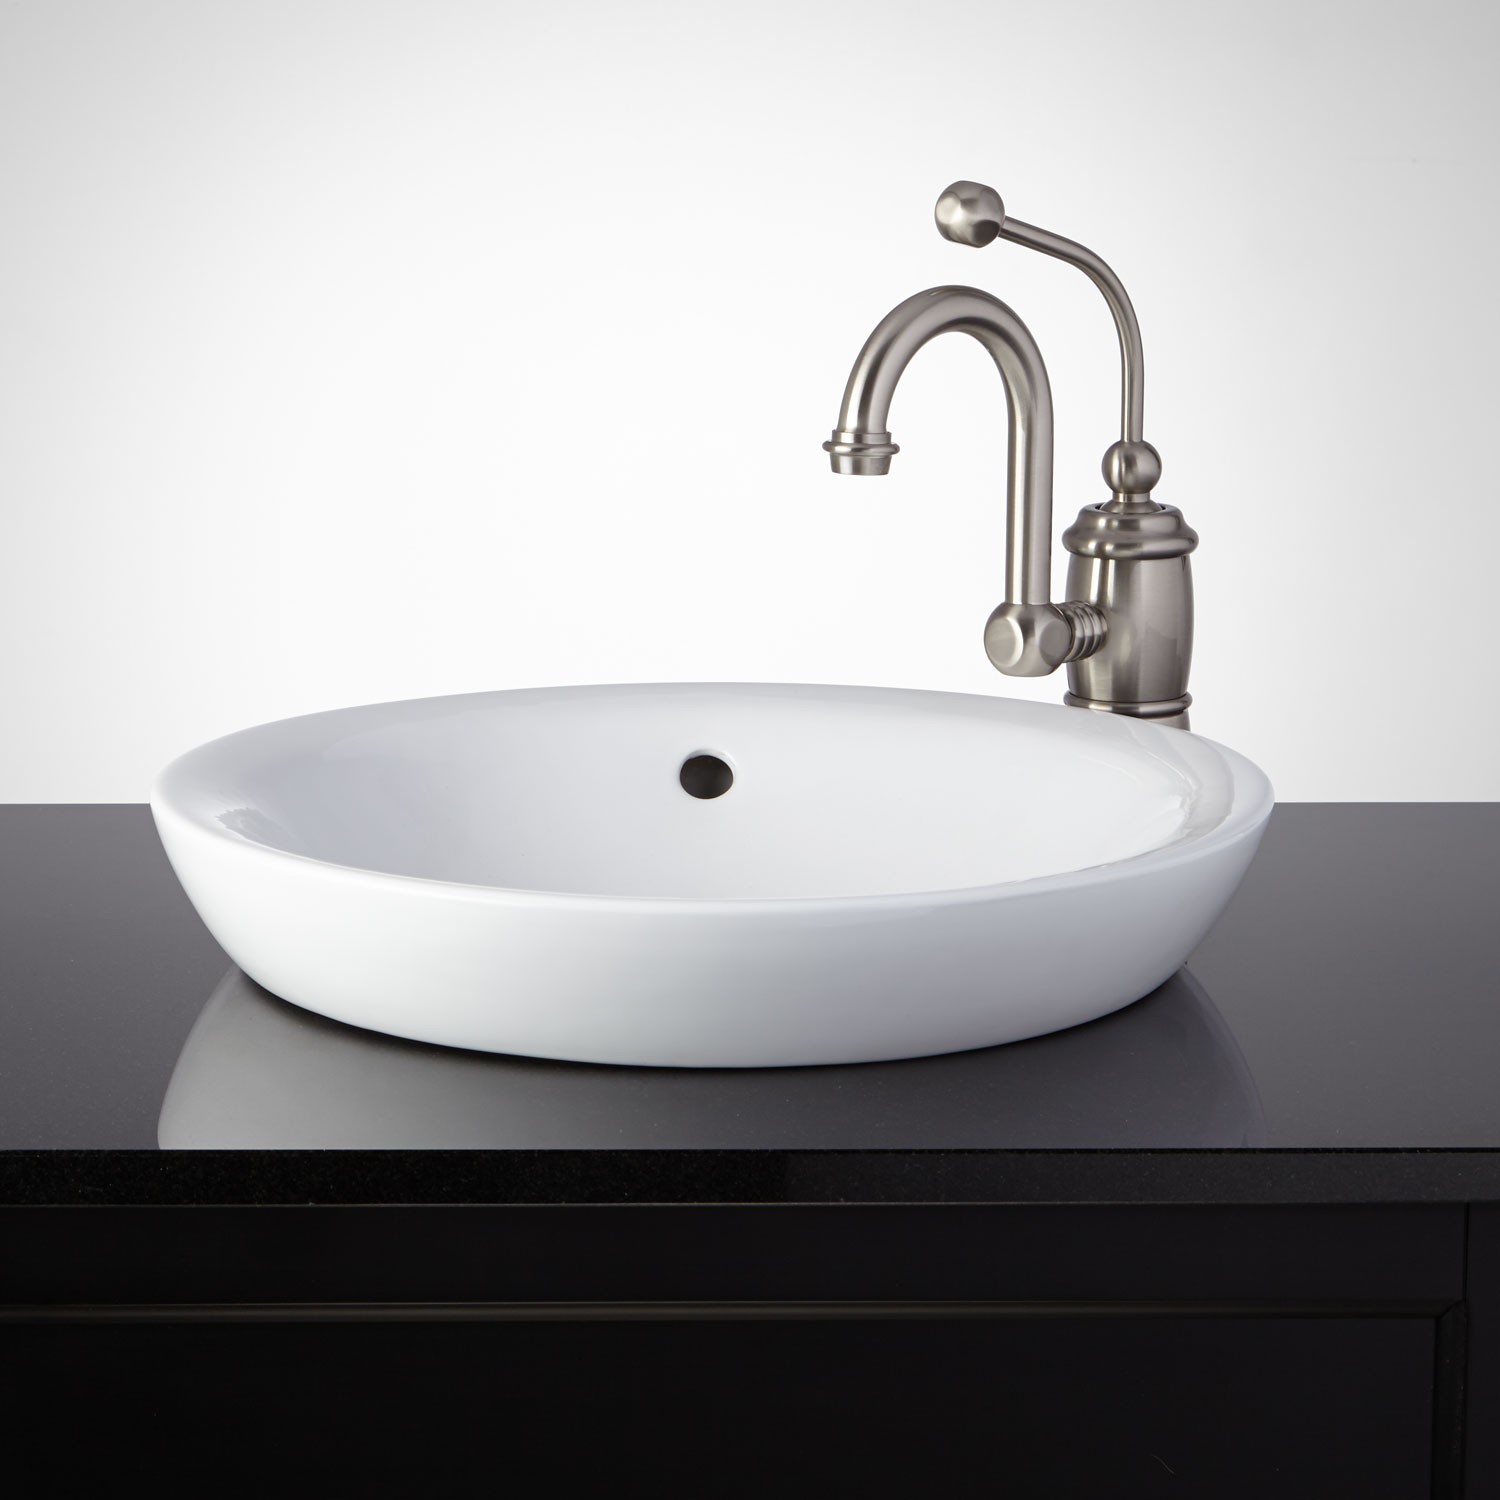 Bathroom sinks – an affordable vanity for you